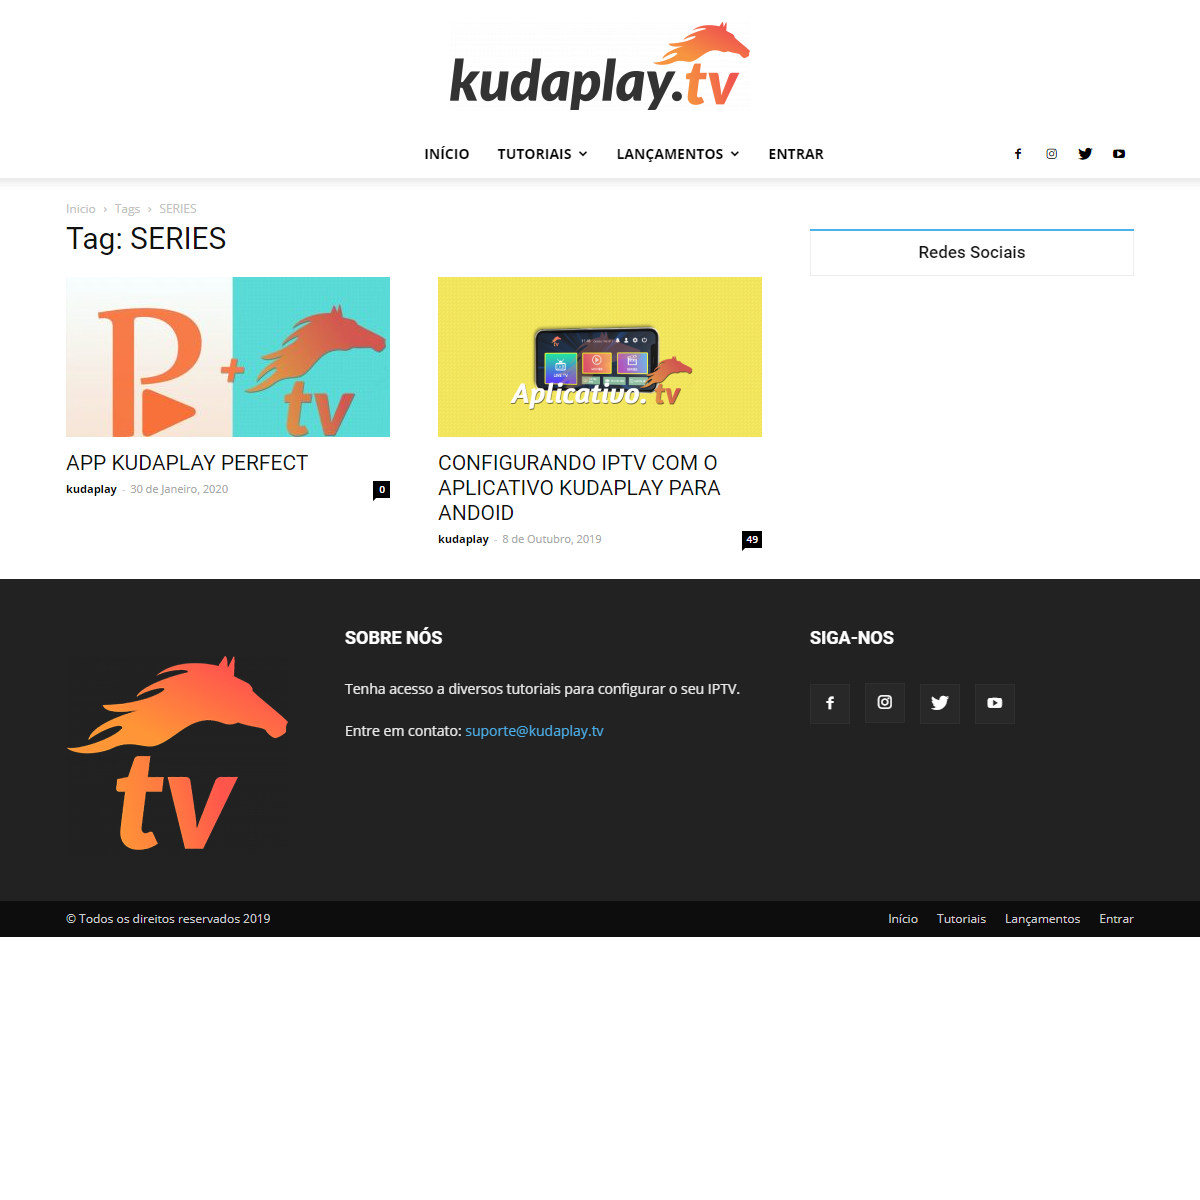 A complete backup of http://kudaplay.tv/blog/tag/series/